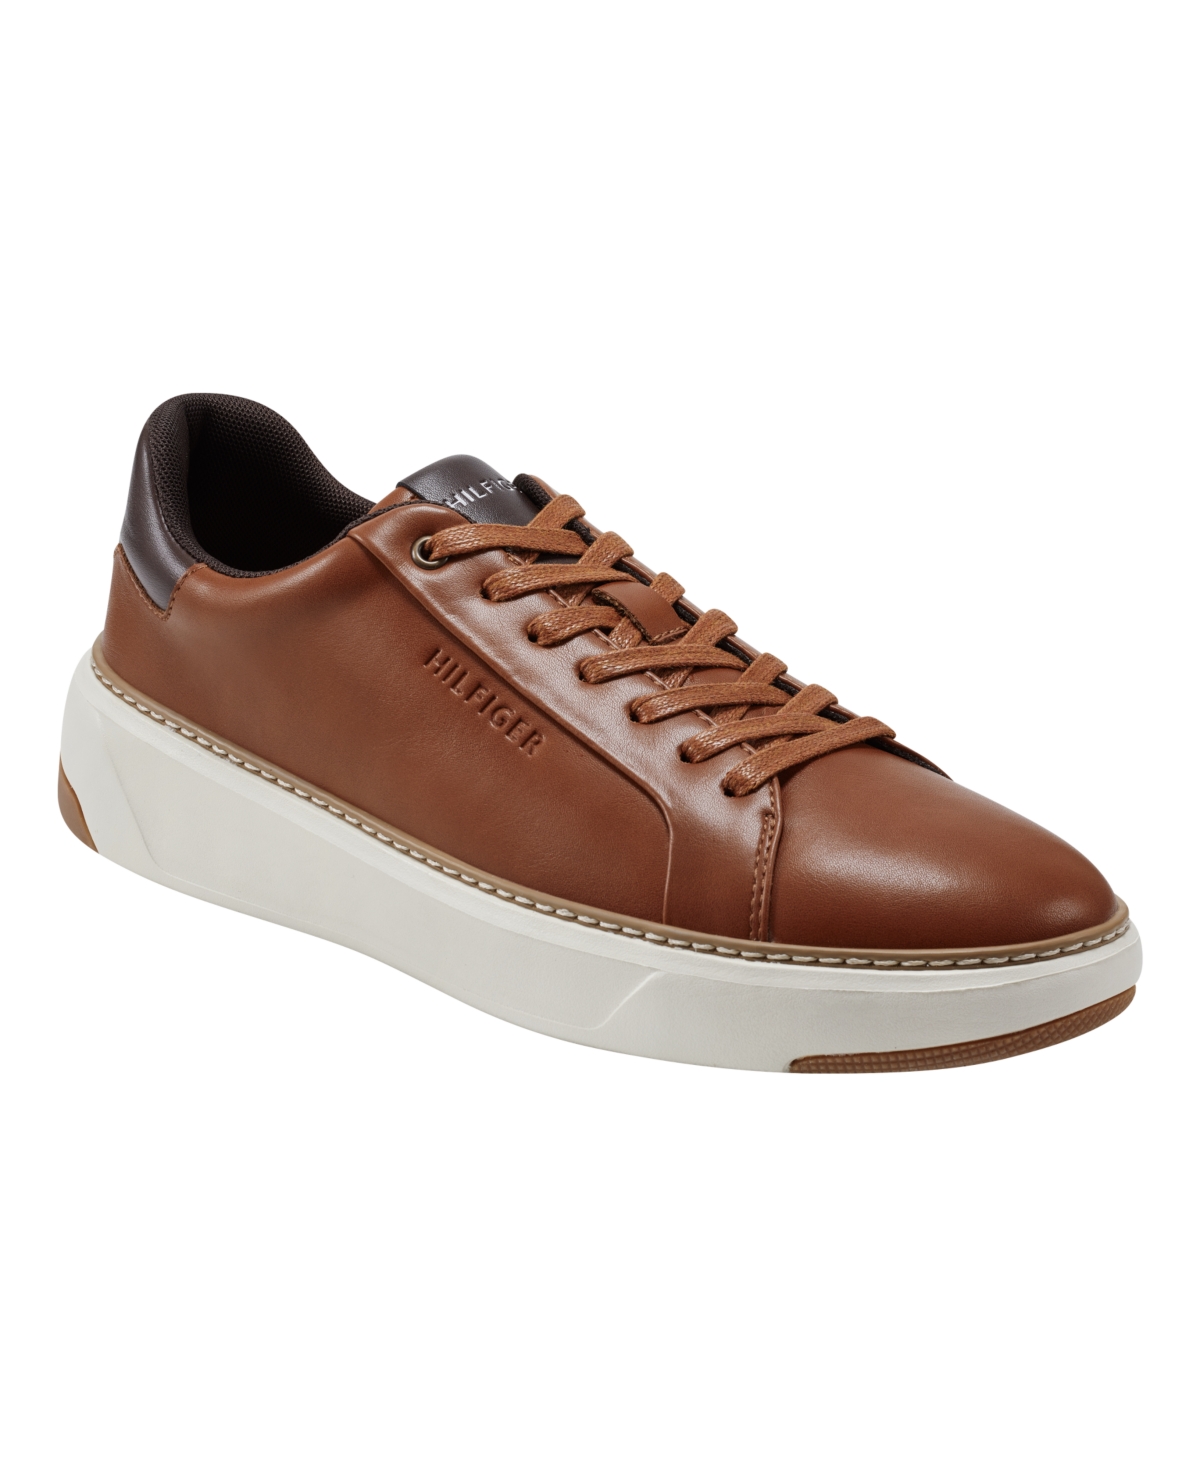 Tommy Hilfiger Men's Hines Lace Up Casual Sneakers Men's Shoes In Cognac,dark Brown